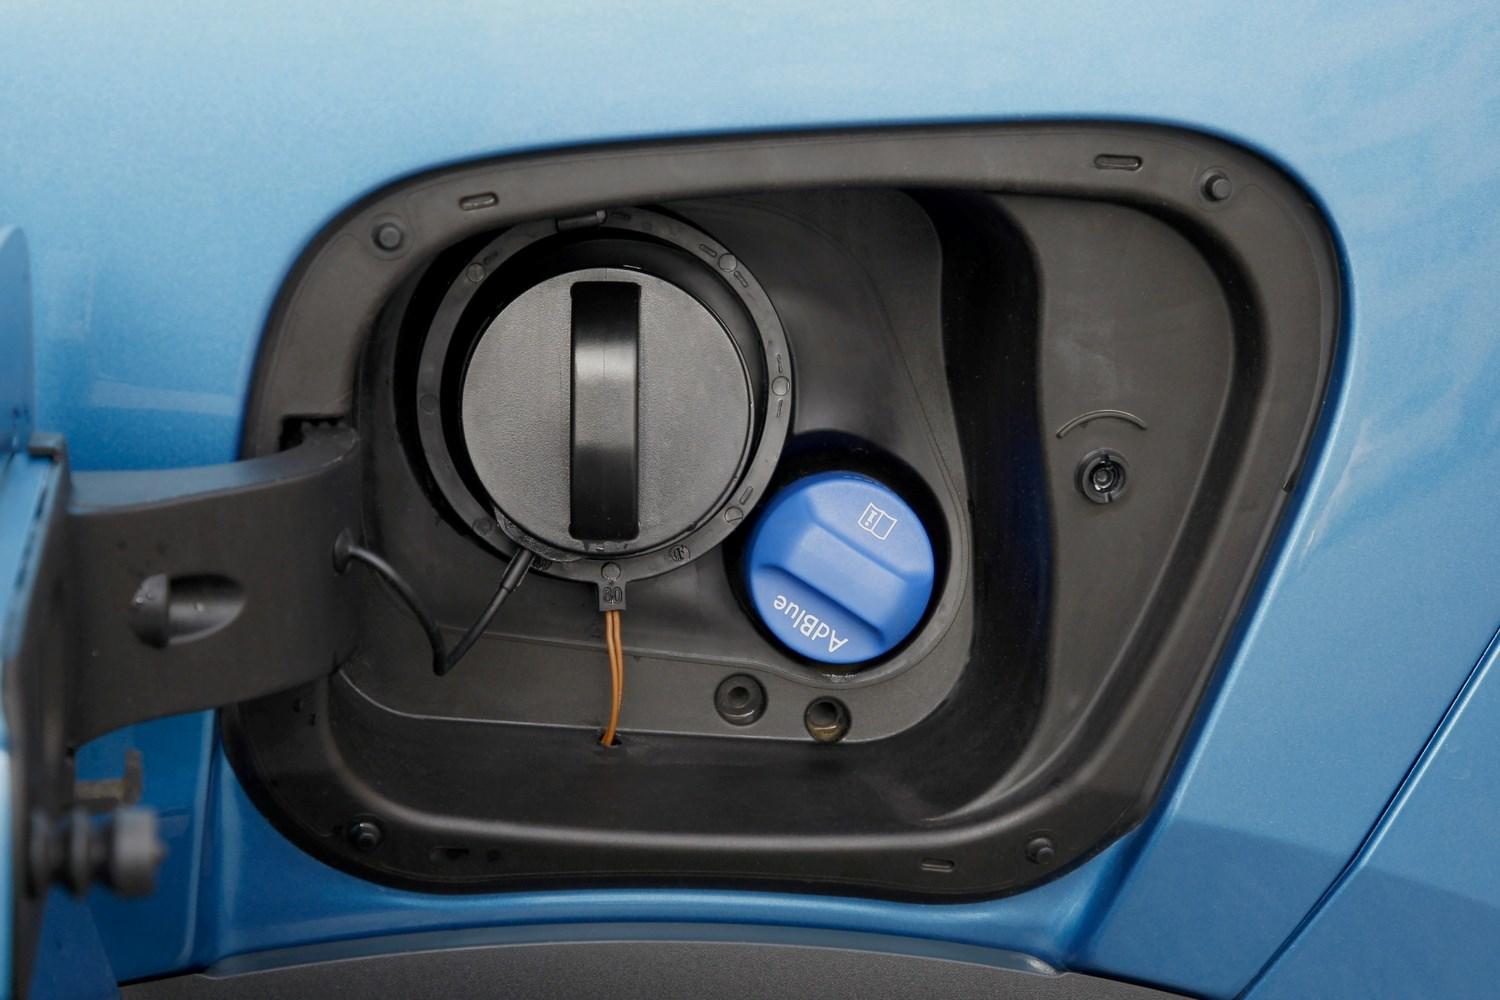 Close-up of a new blue Volkswagen Polo diesel and AdBlue fuel caps.